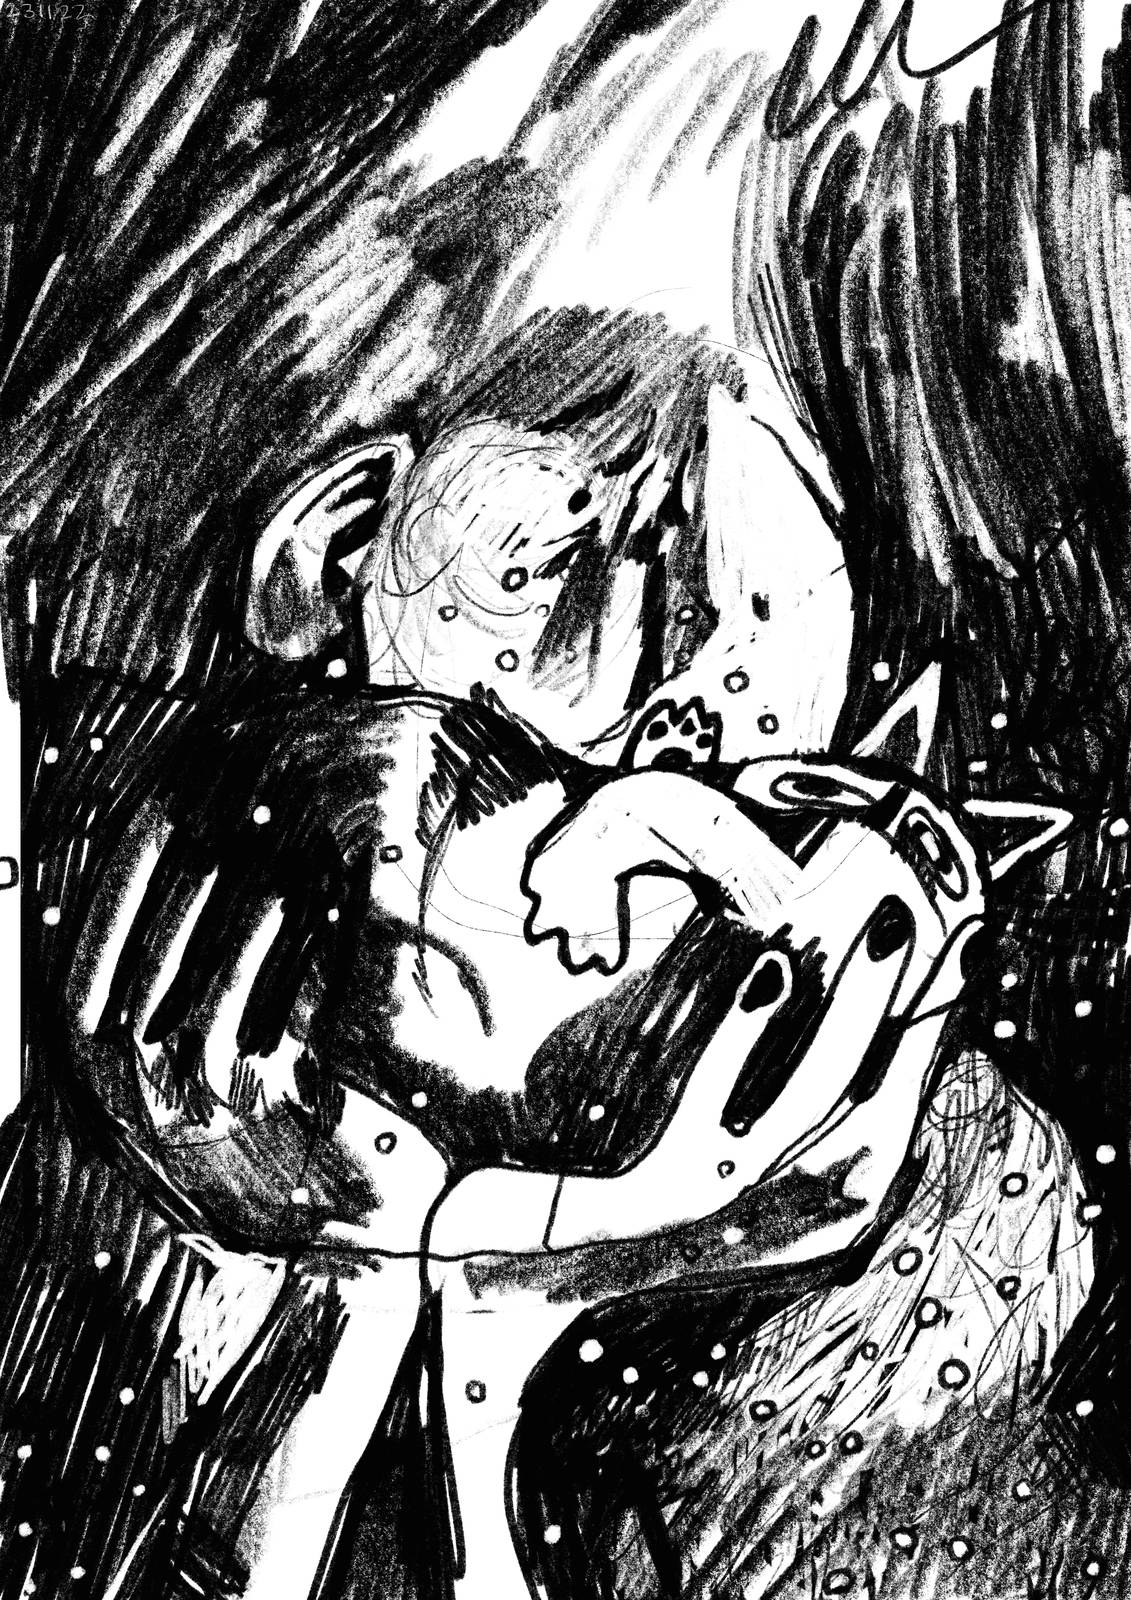 Sketchy black and white drawing of someone crying and holding a potato shaped cat to their face